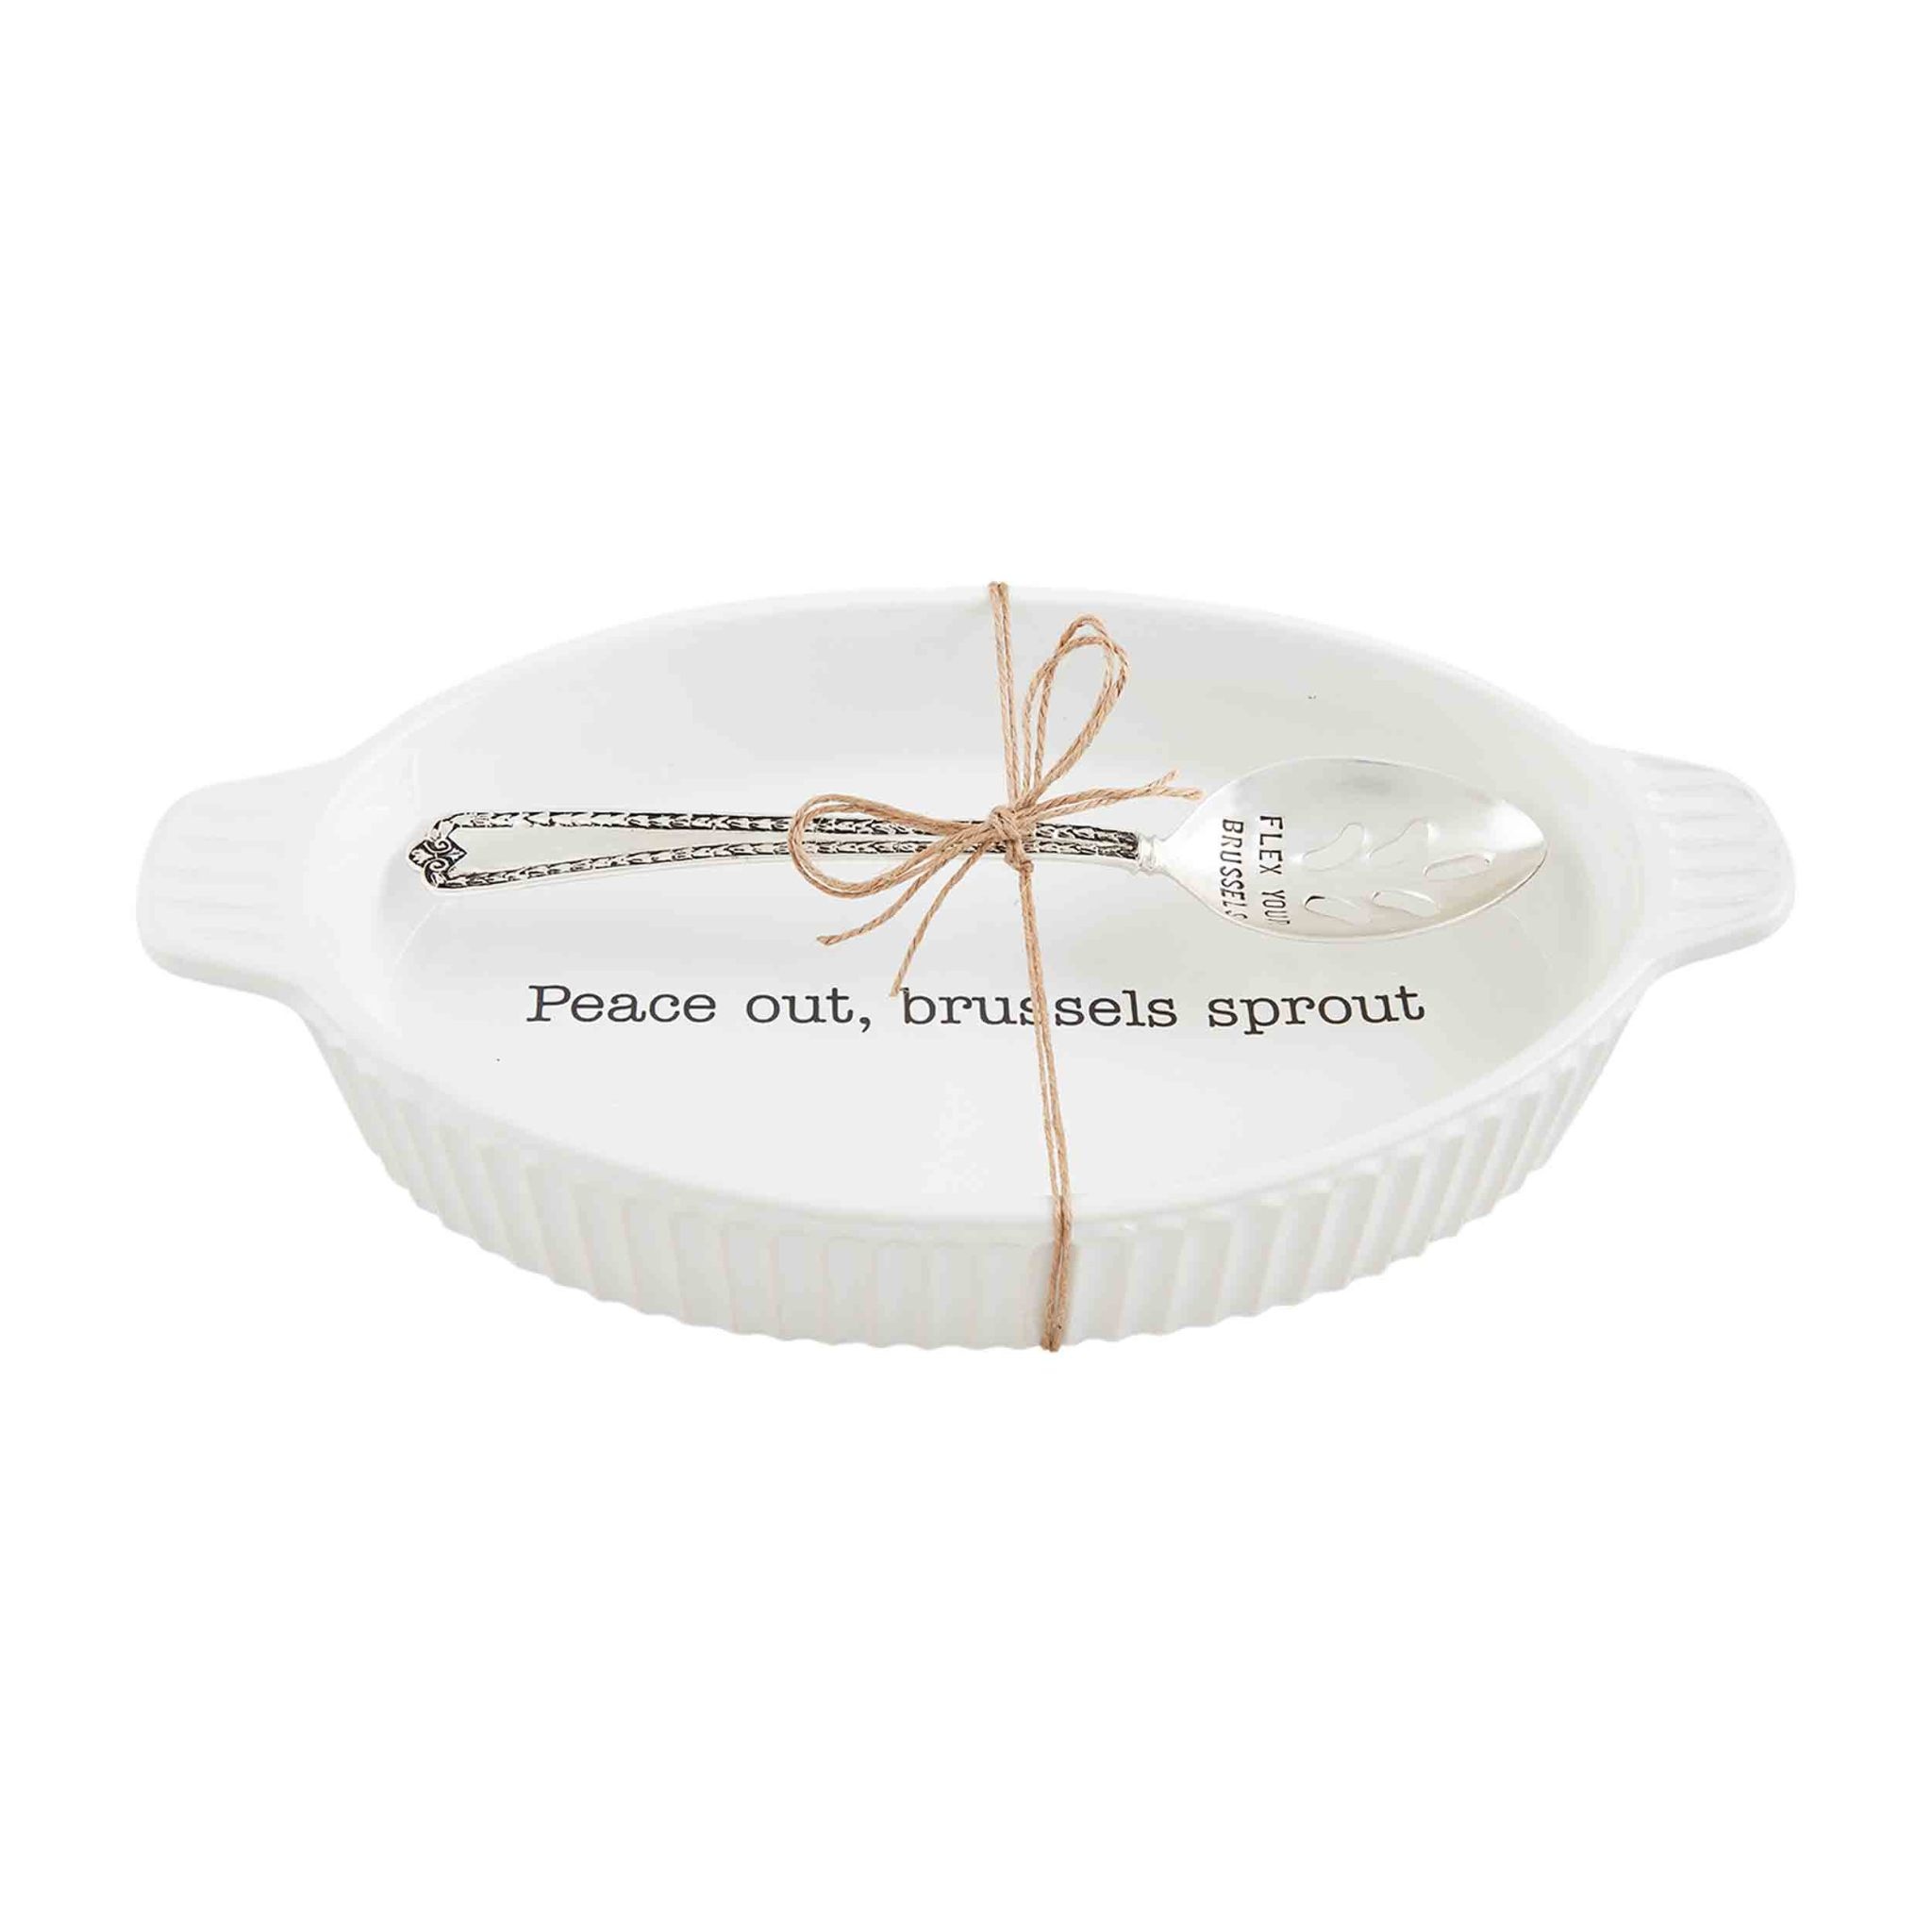 Mudpie Brussels Sprouts Serving Dish Set